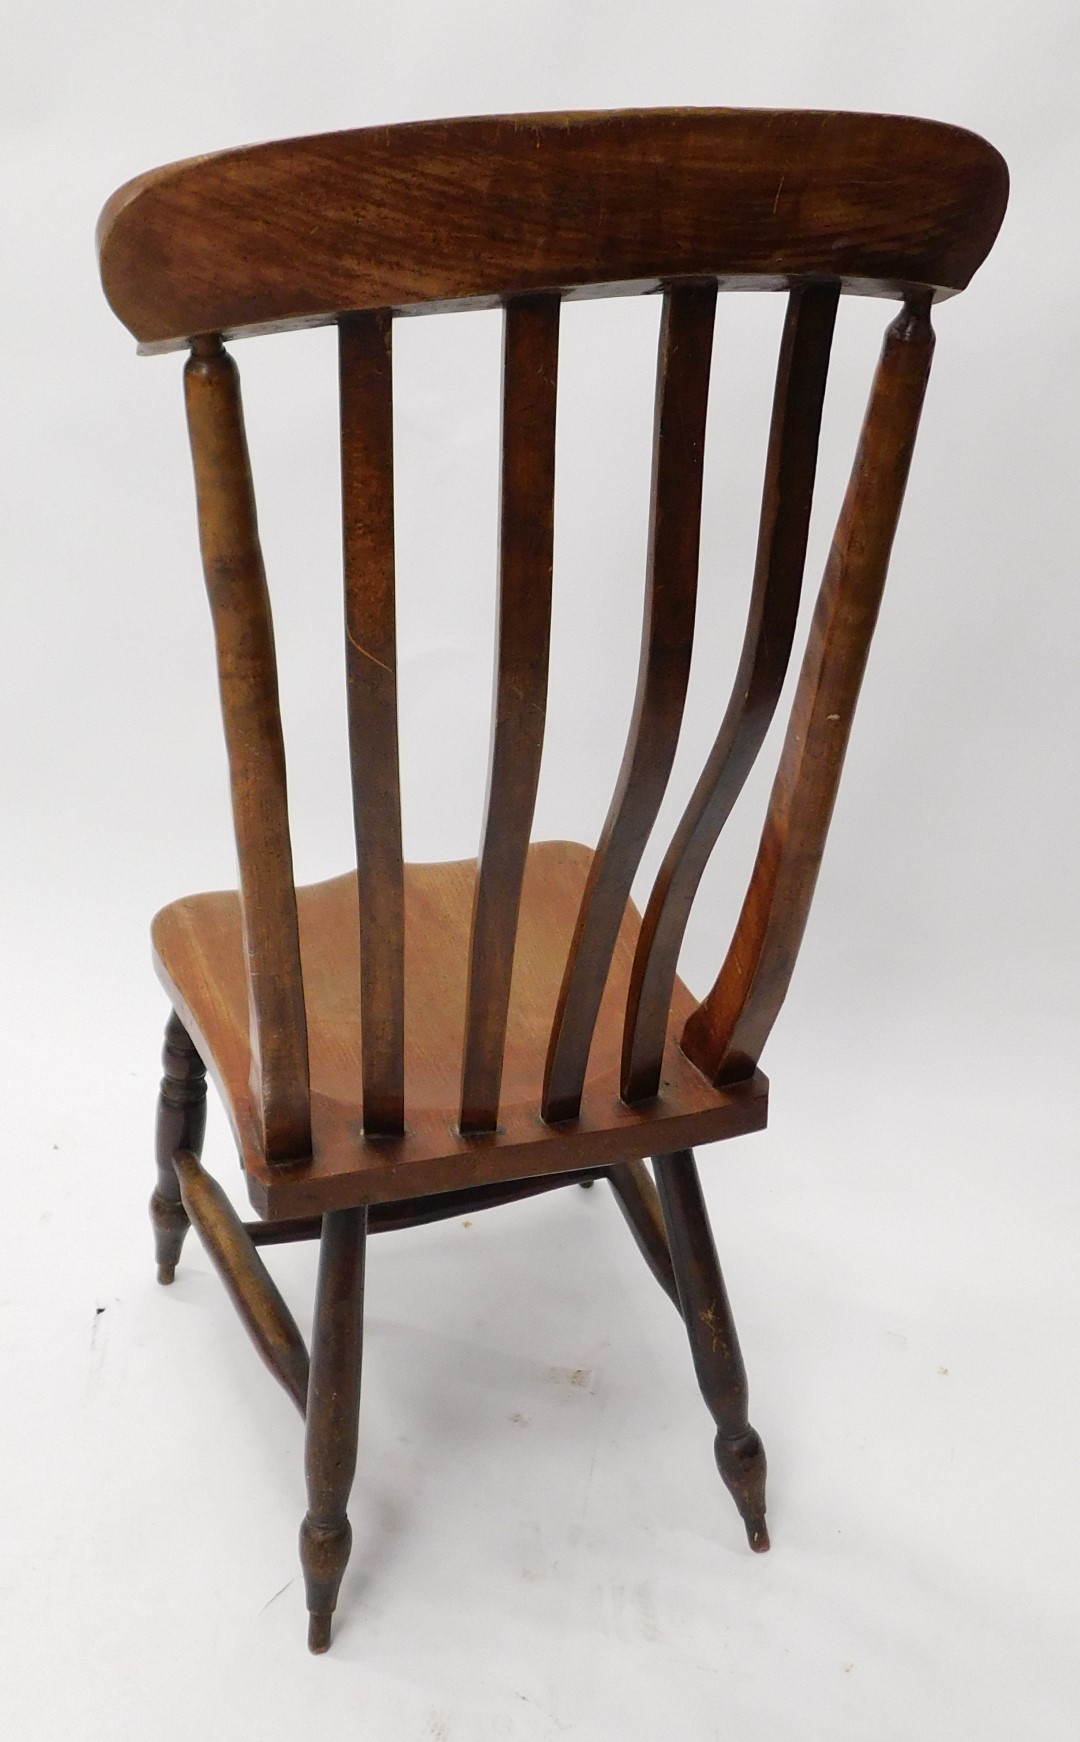 A 19thC beech lath back side chair, with a solid seat, on turned legs with H stretcher. - Image 3 of 3